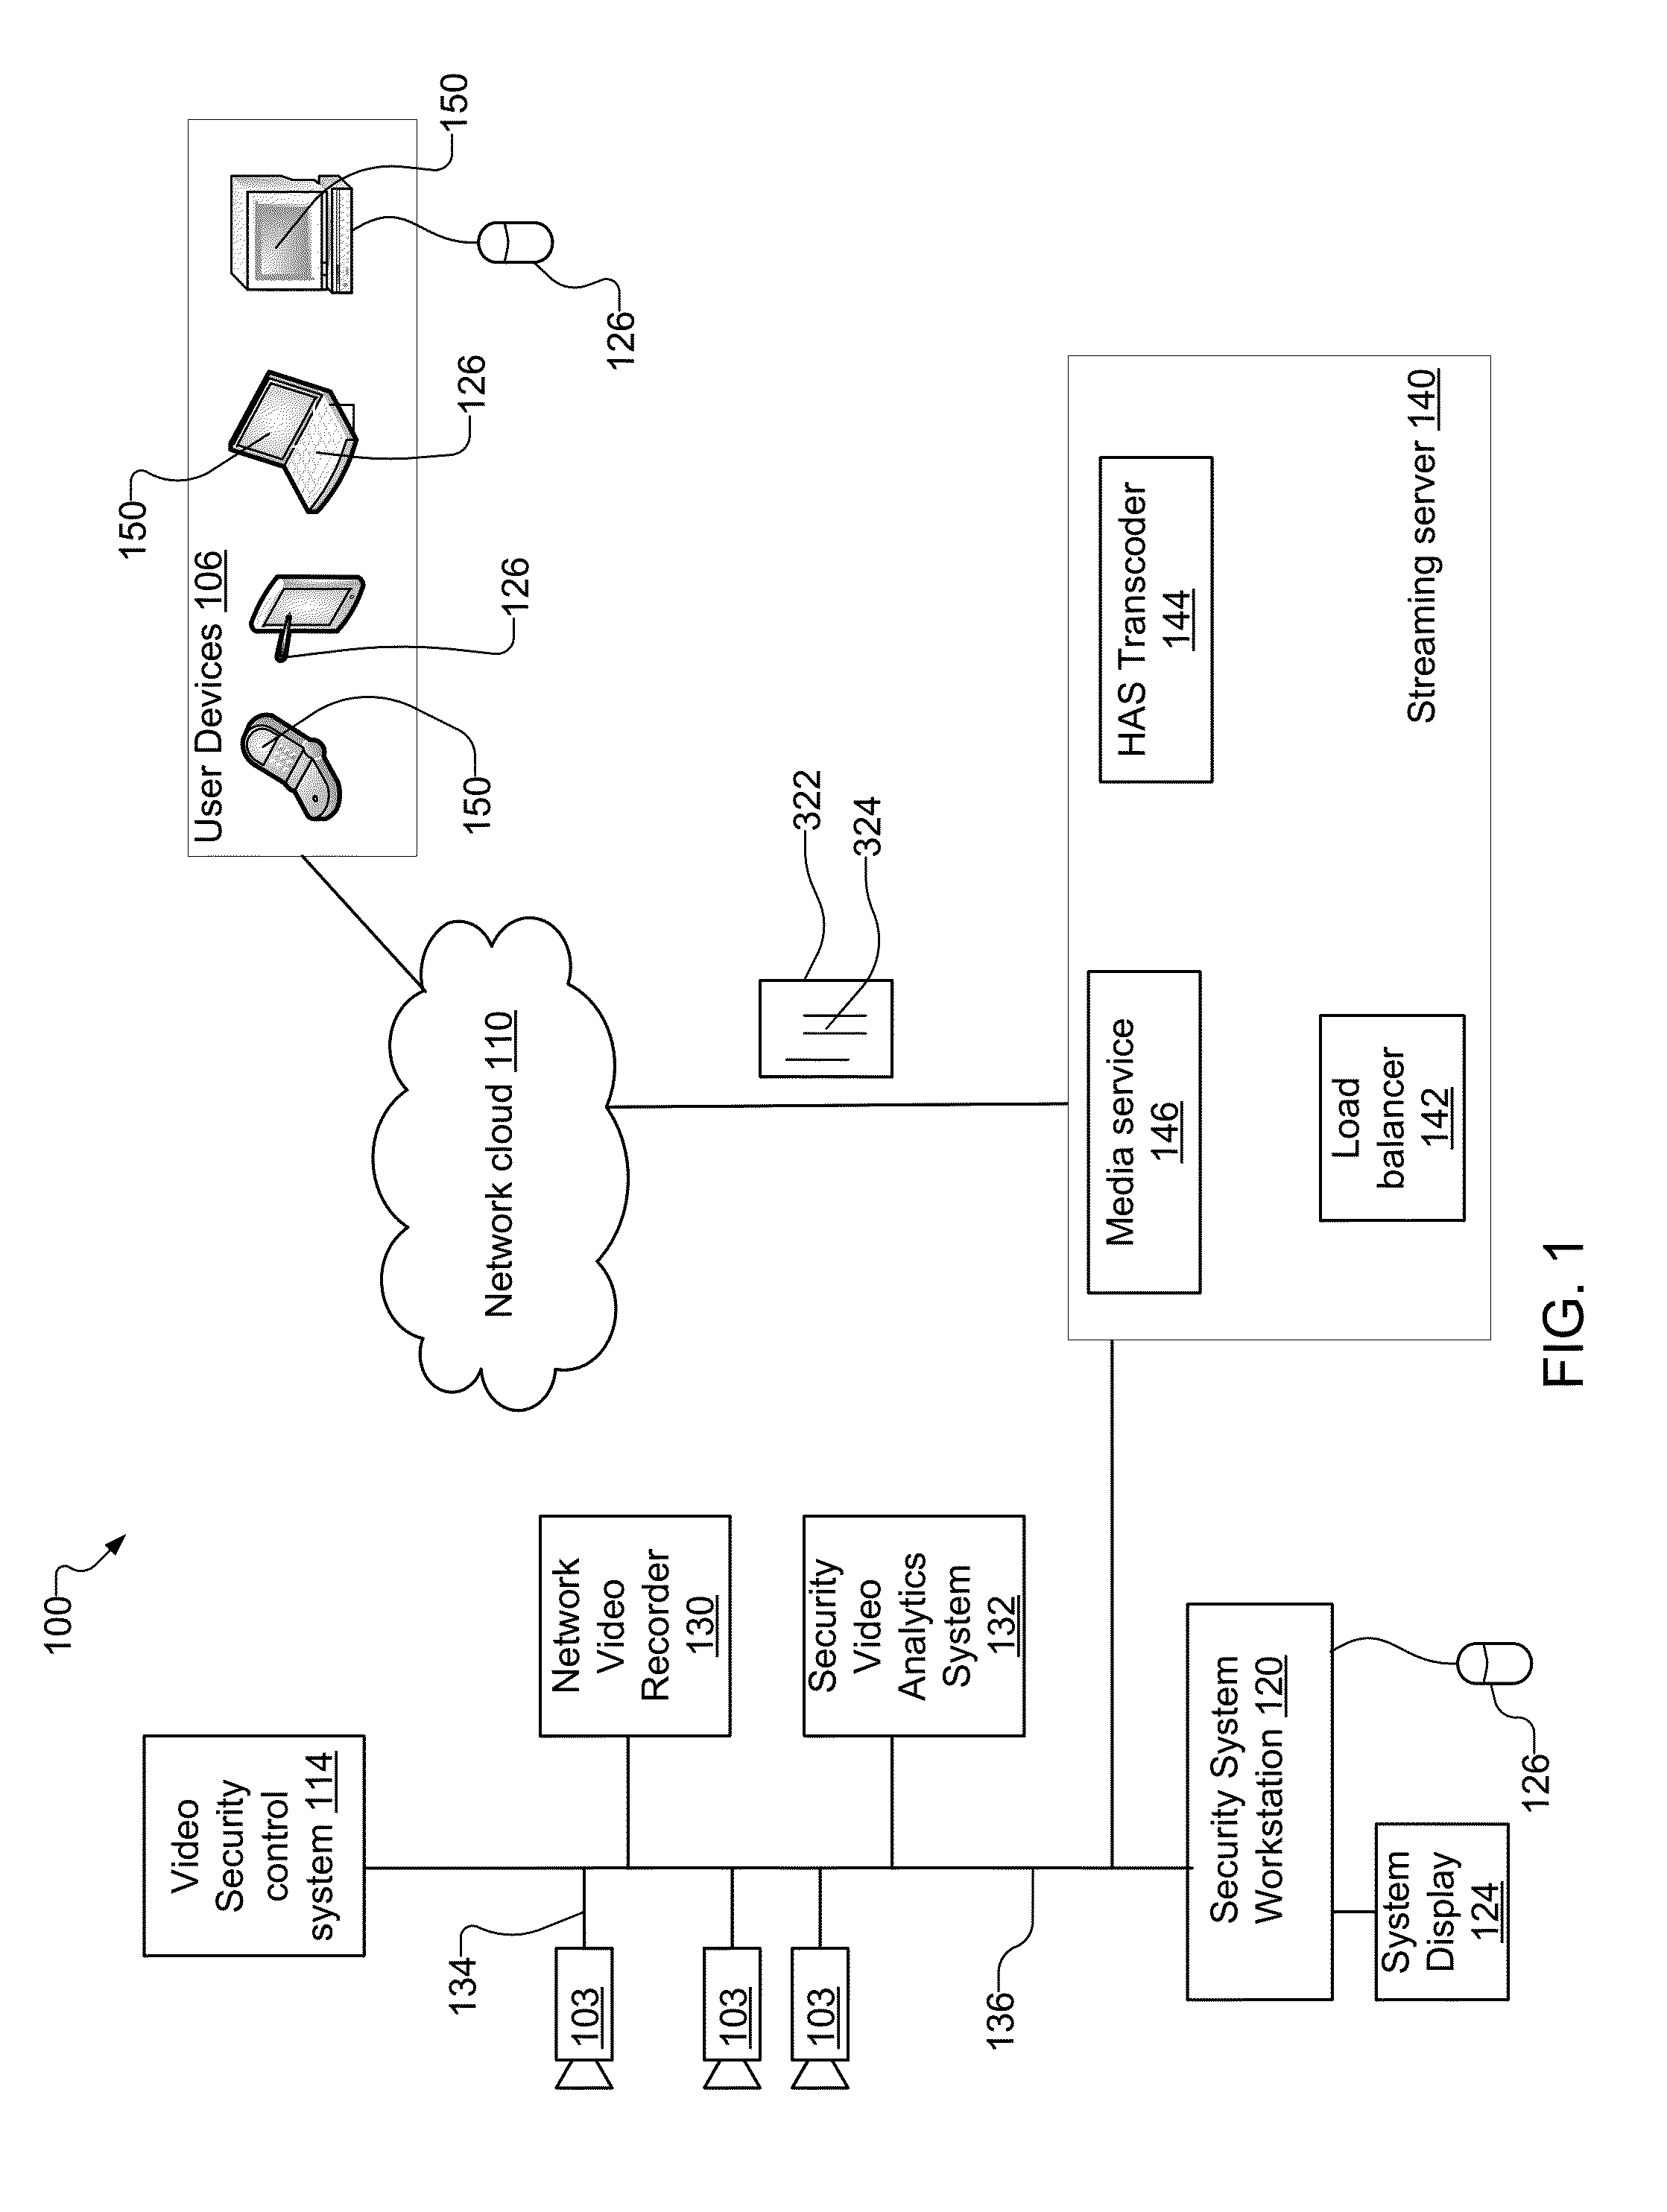 Selection and Display of Adaptive Rate Streams in Video Security System